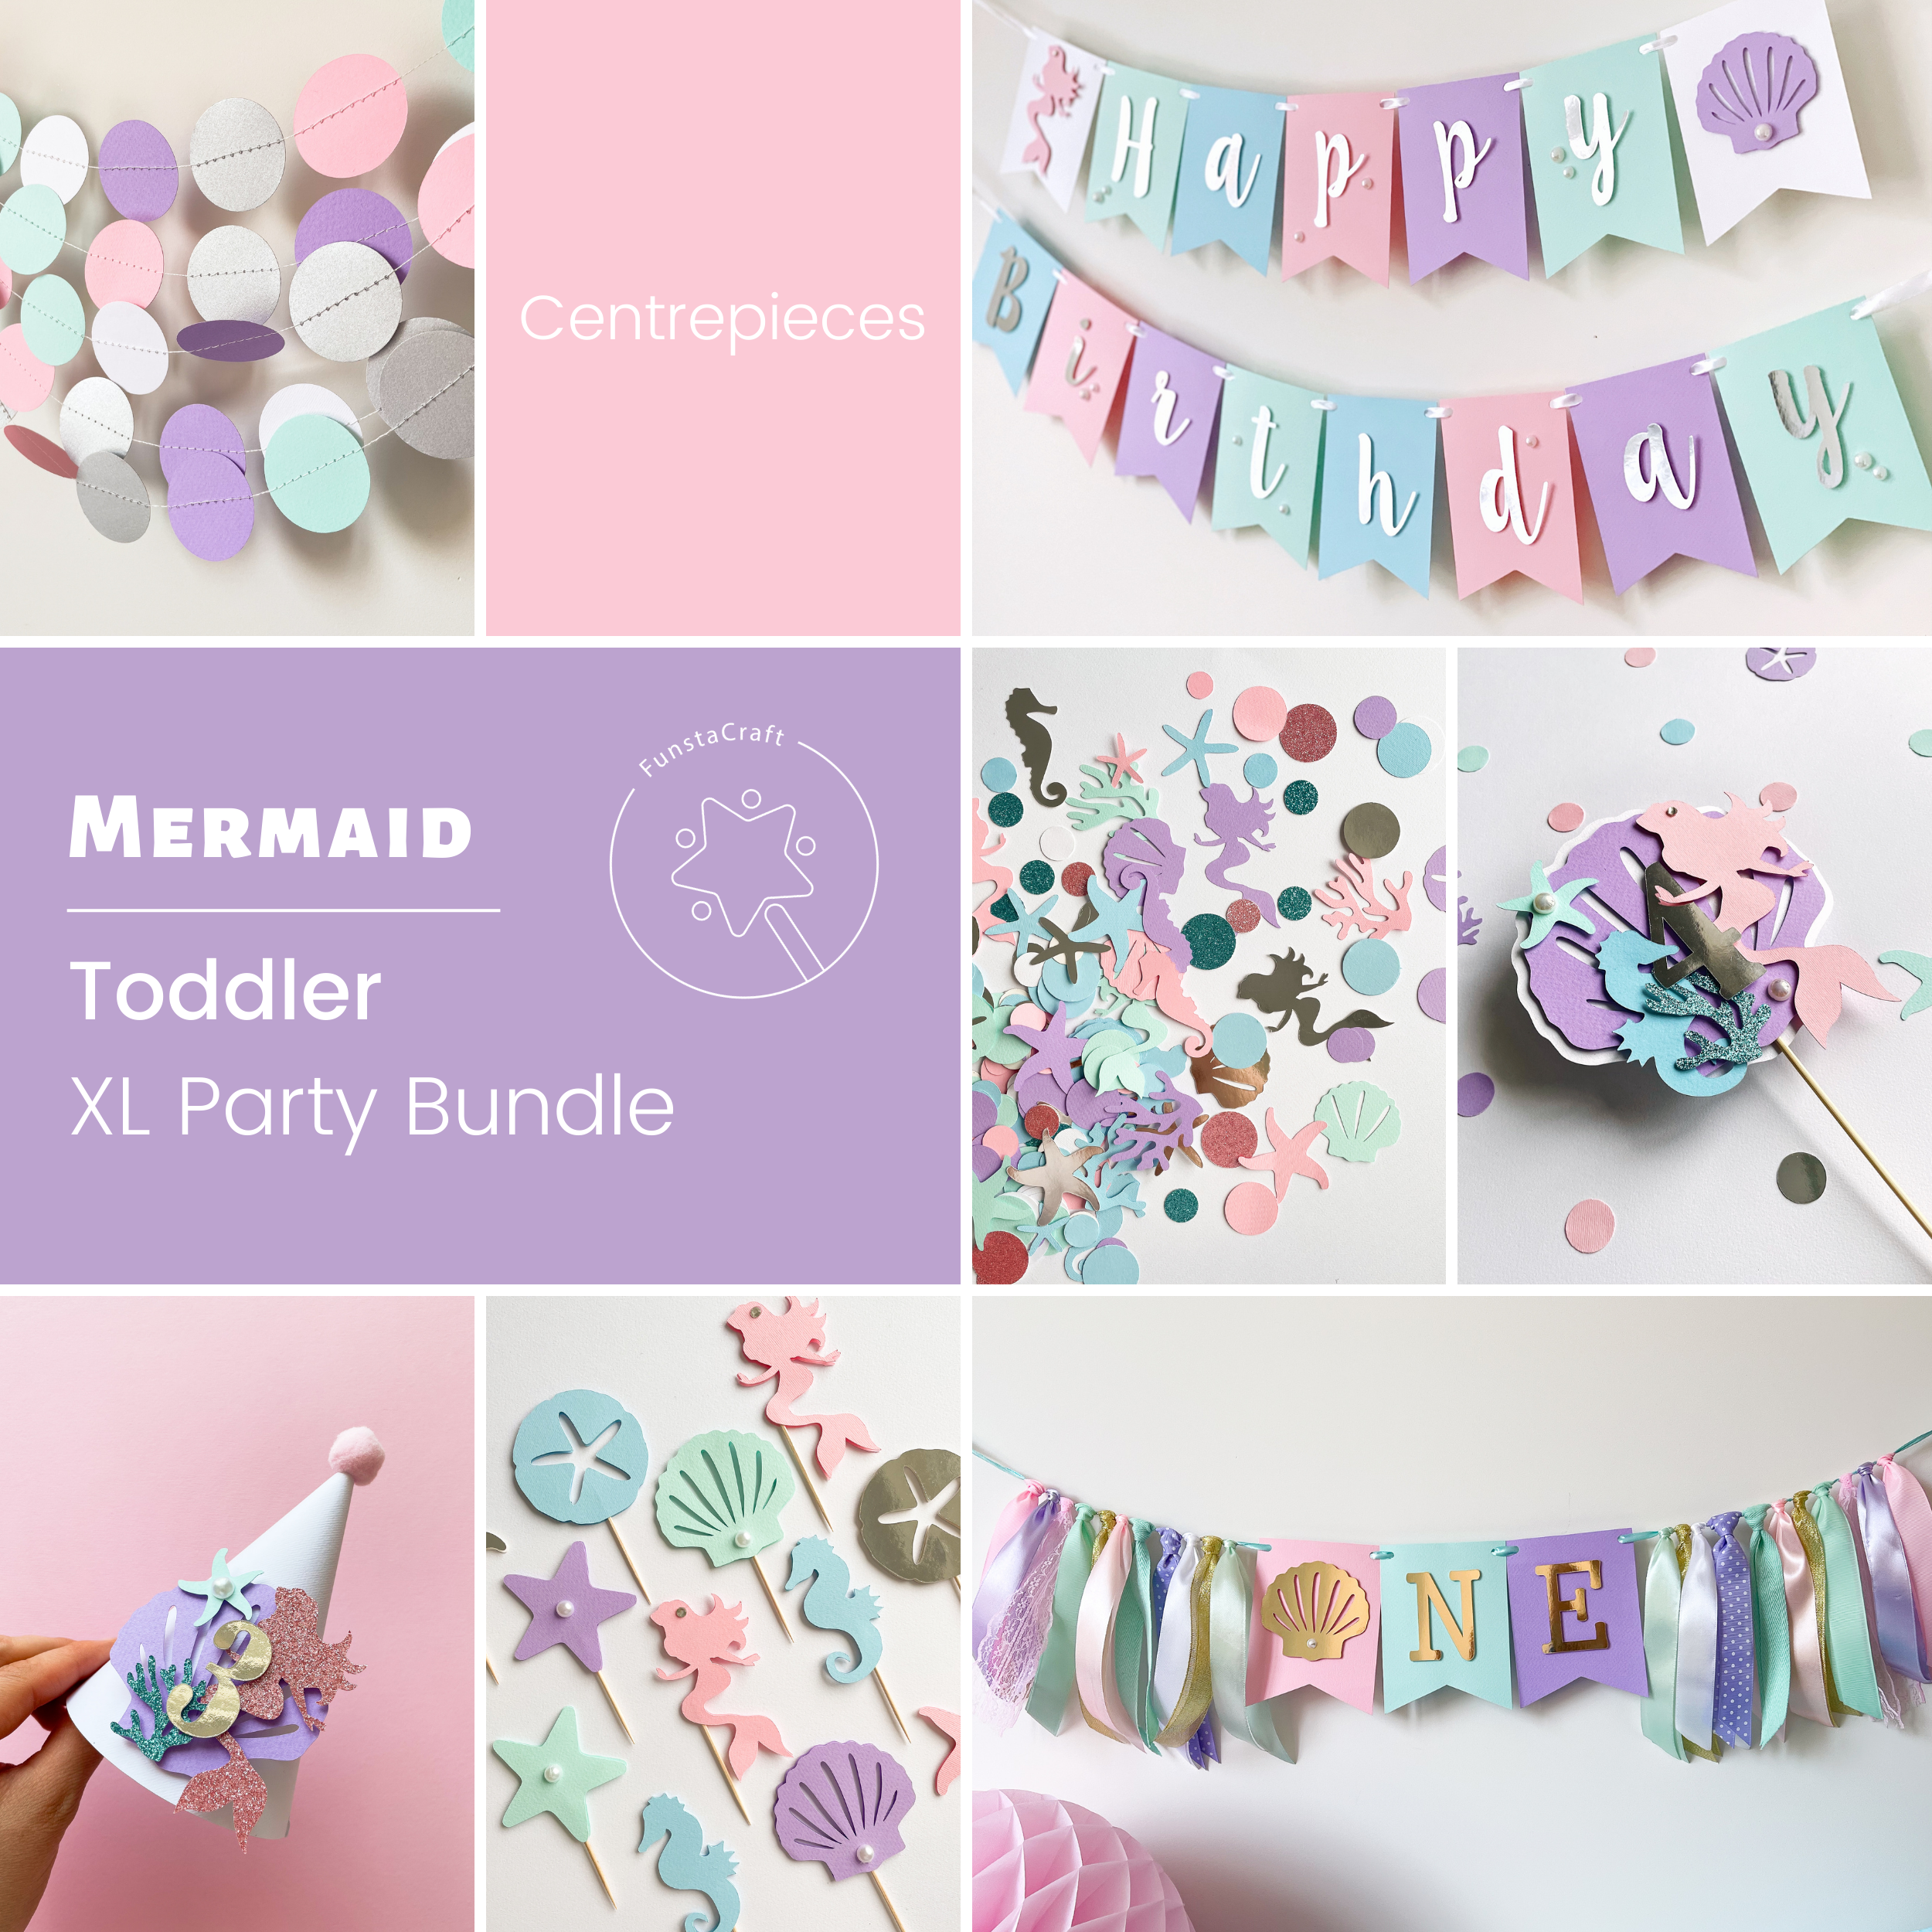 Mermaid Birthday Party Bundle Mermaid Toddler Party Decor Under the Sea Little Mermaid Sea Shells Horse Themed party